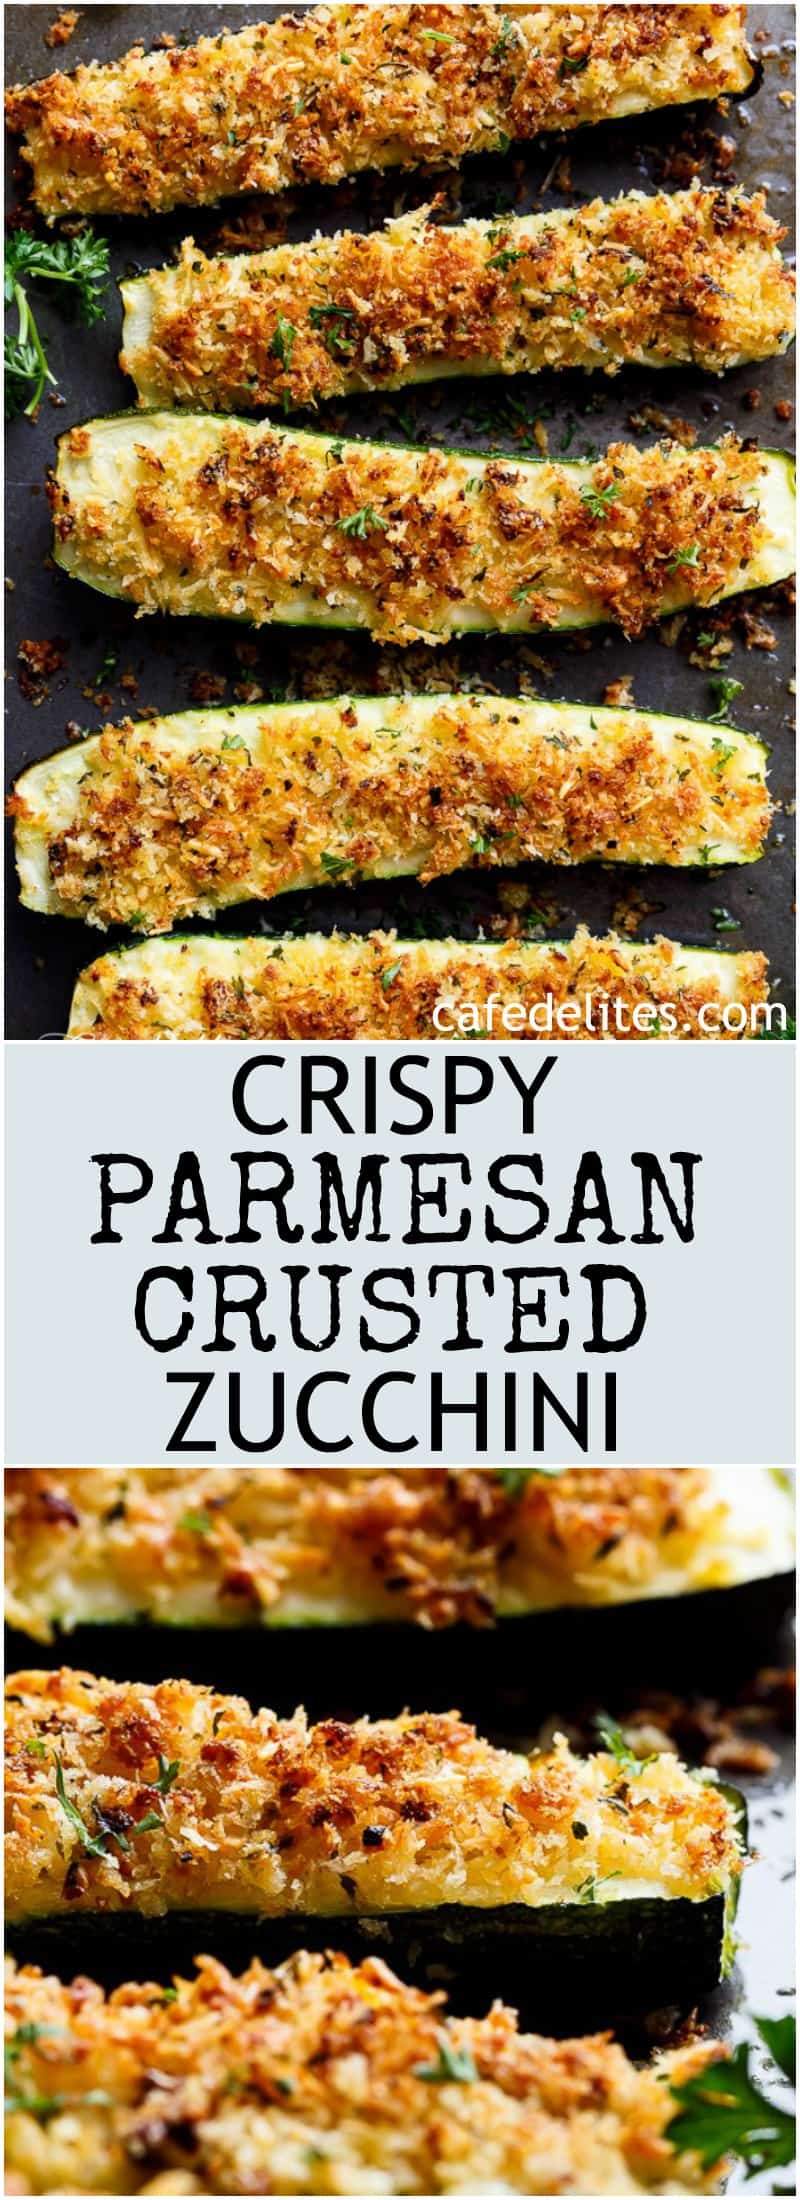 Parmesan Crusted Zucchini are easy to make and are one of THE best ways to enjoy zucchini! Crispy and crunchy, the perfect side dish OR snack! | https://cafedelites.com